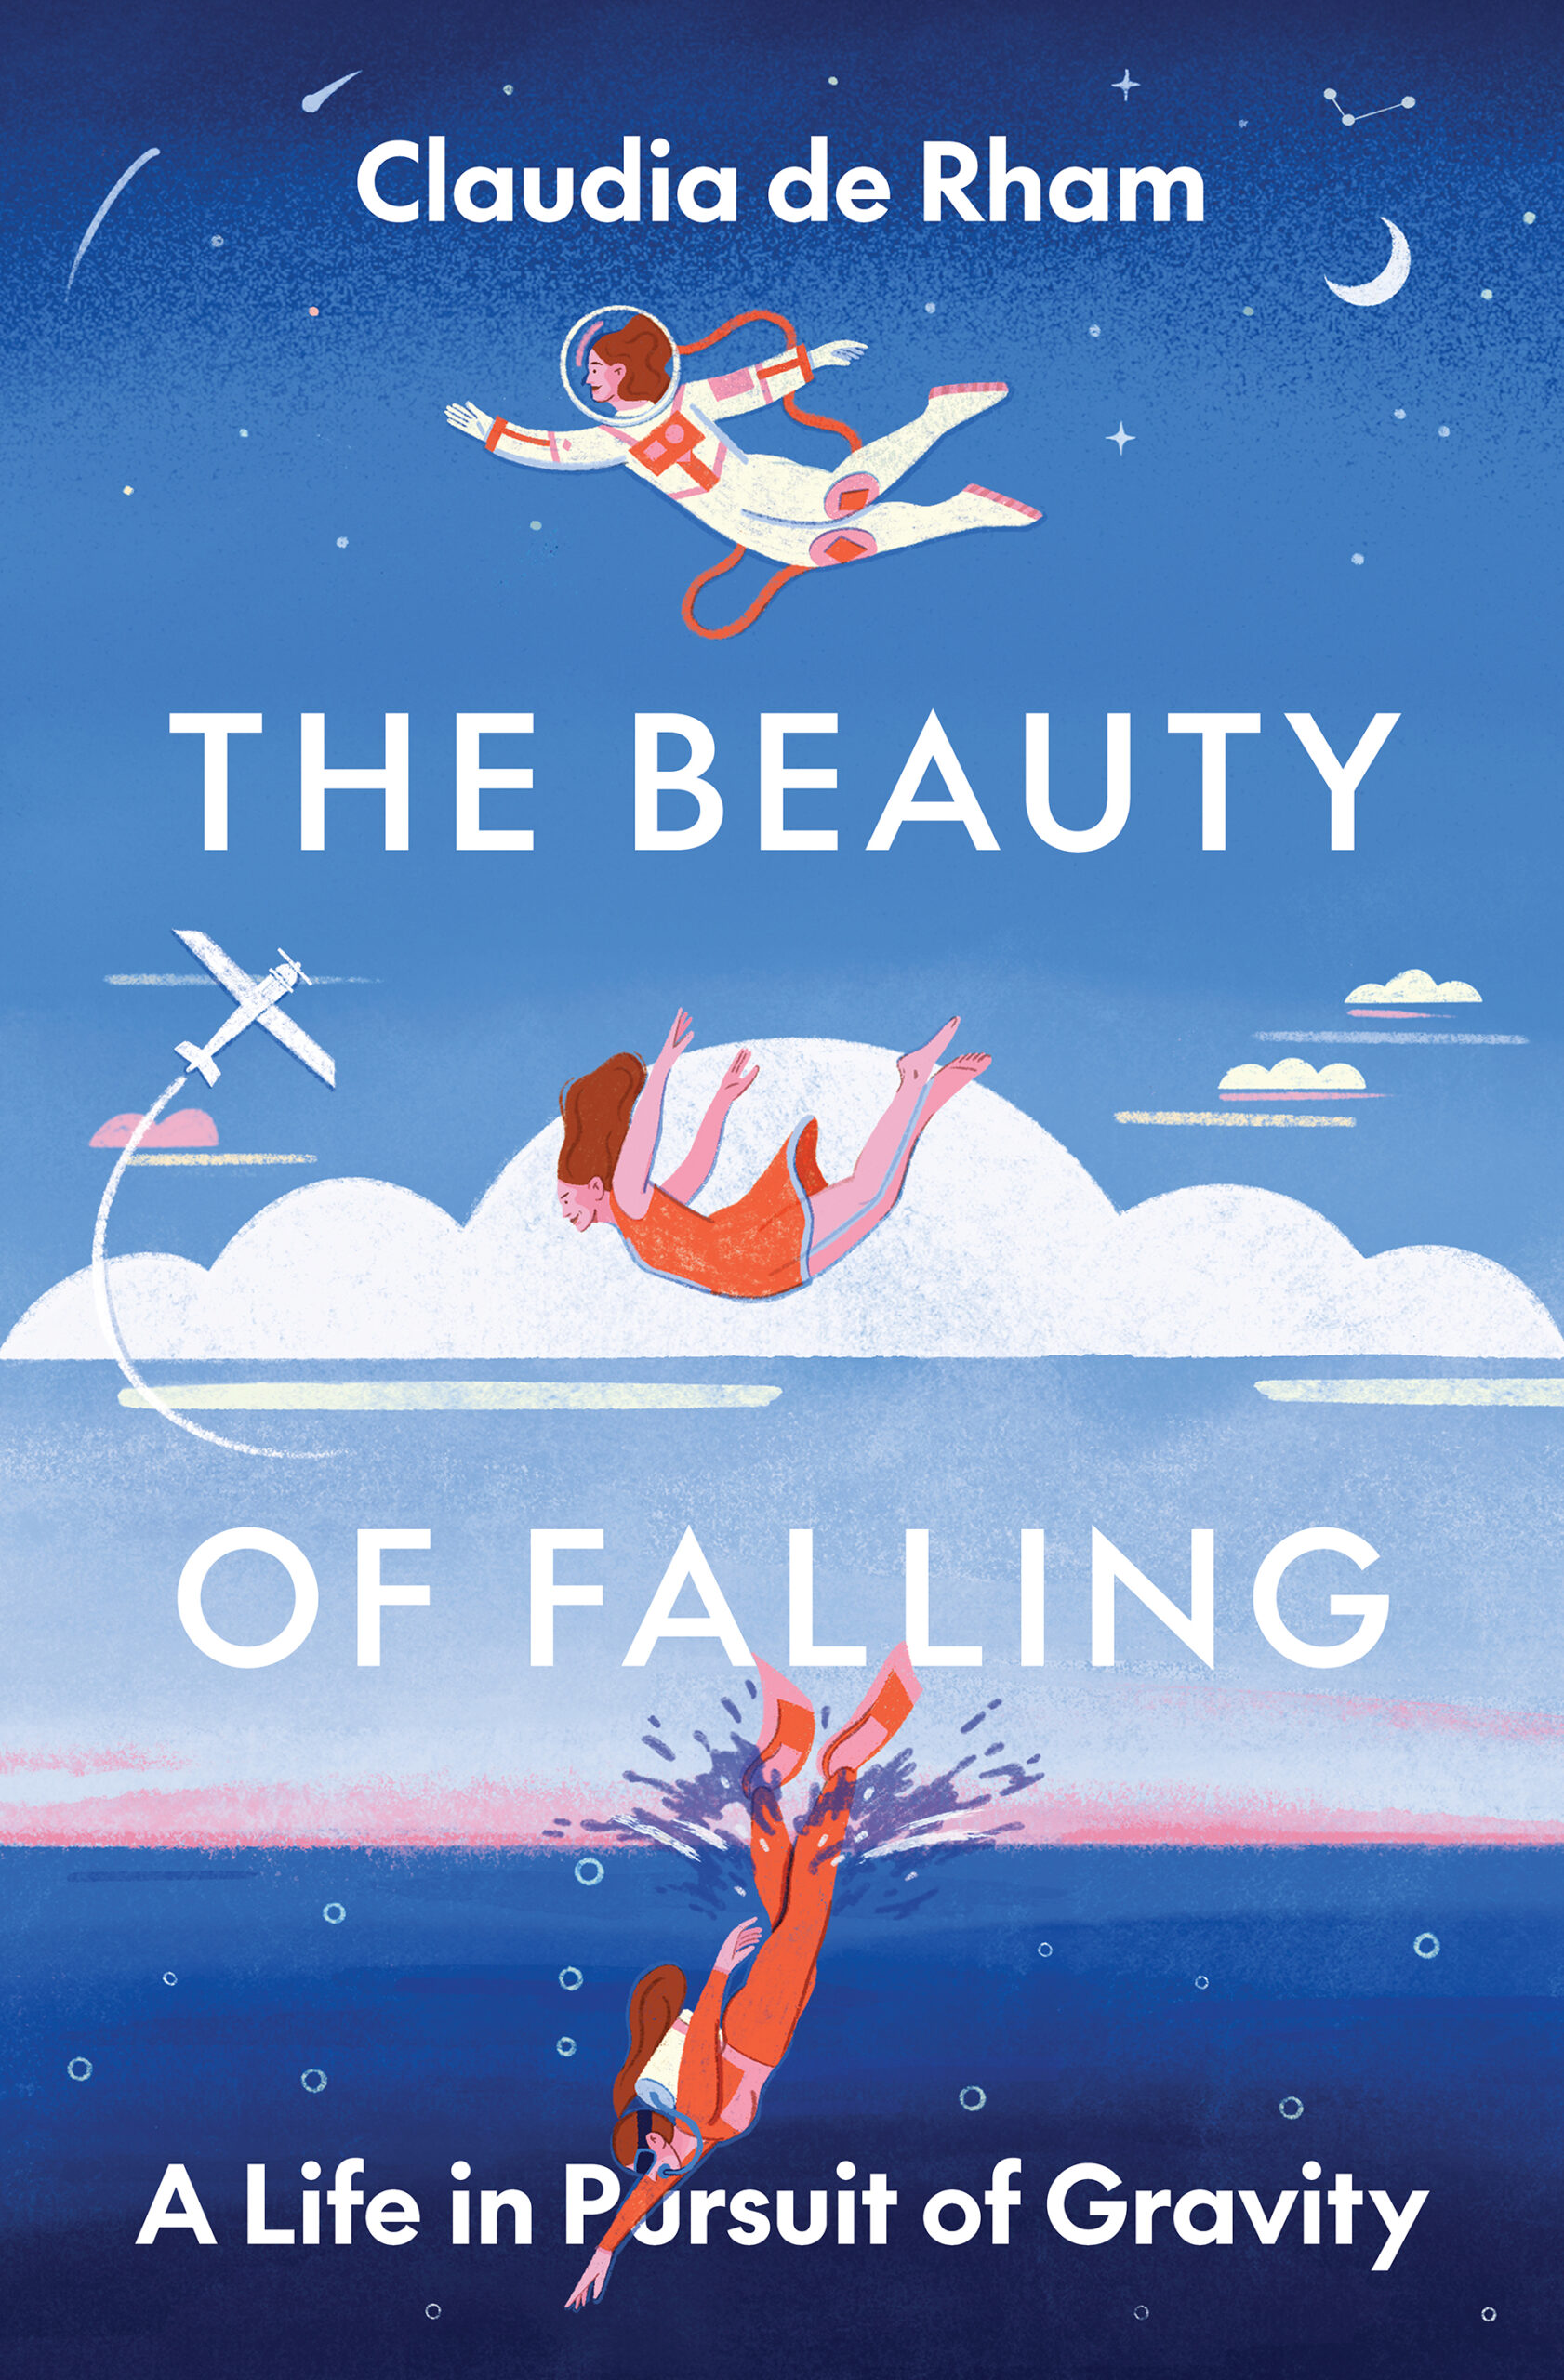 THE BEAUTY OF FALLING